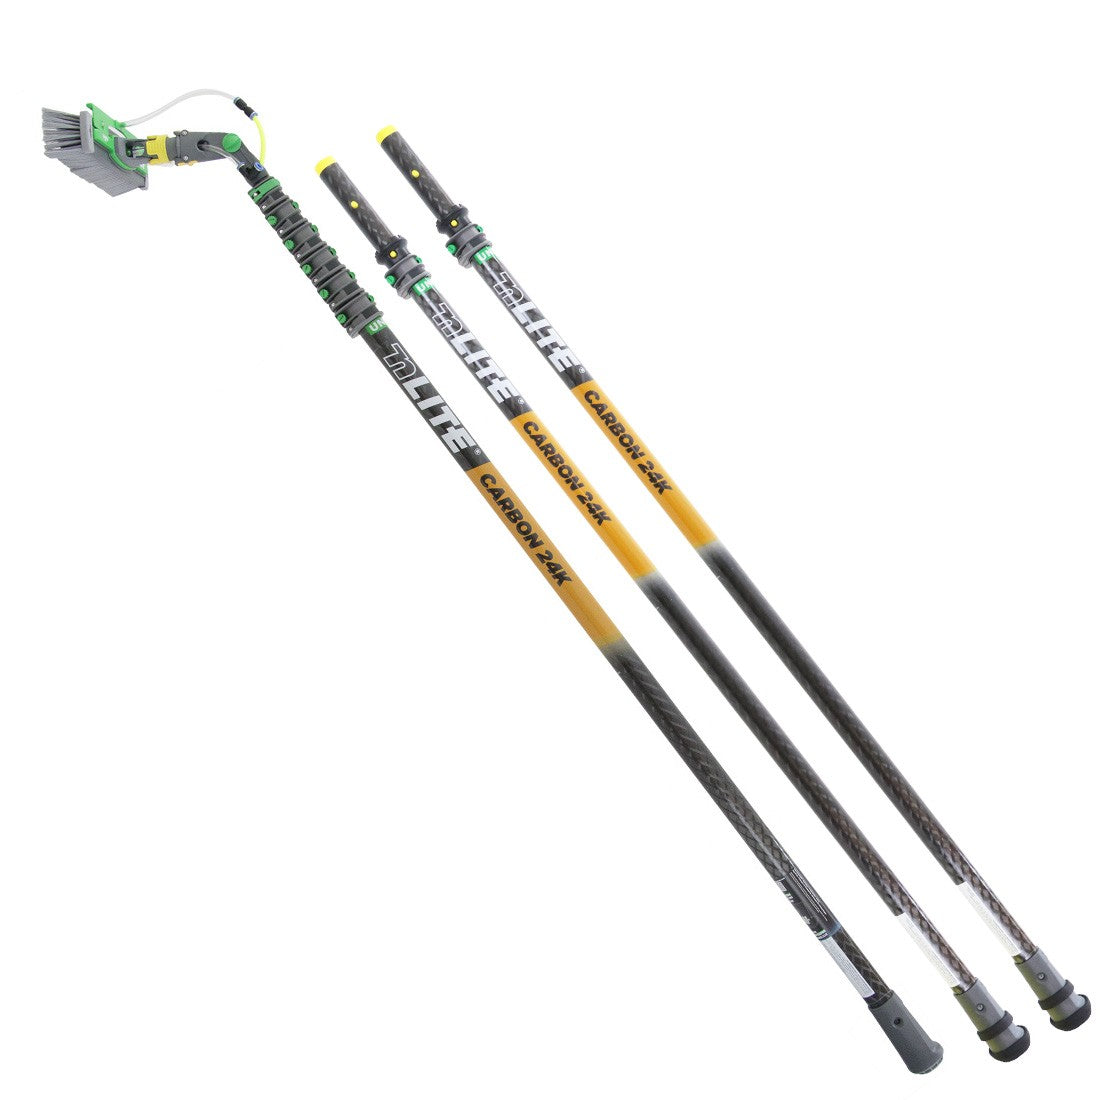 Unger nLite Carbon 24K Water Fed Pole Kit 49 Foot - 11 Inch Powerbrush Full View